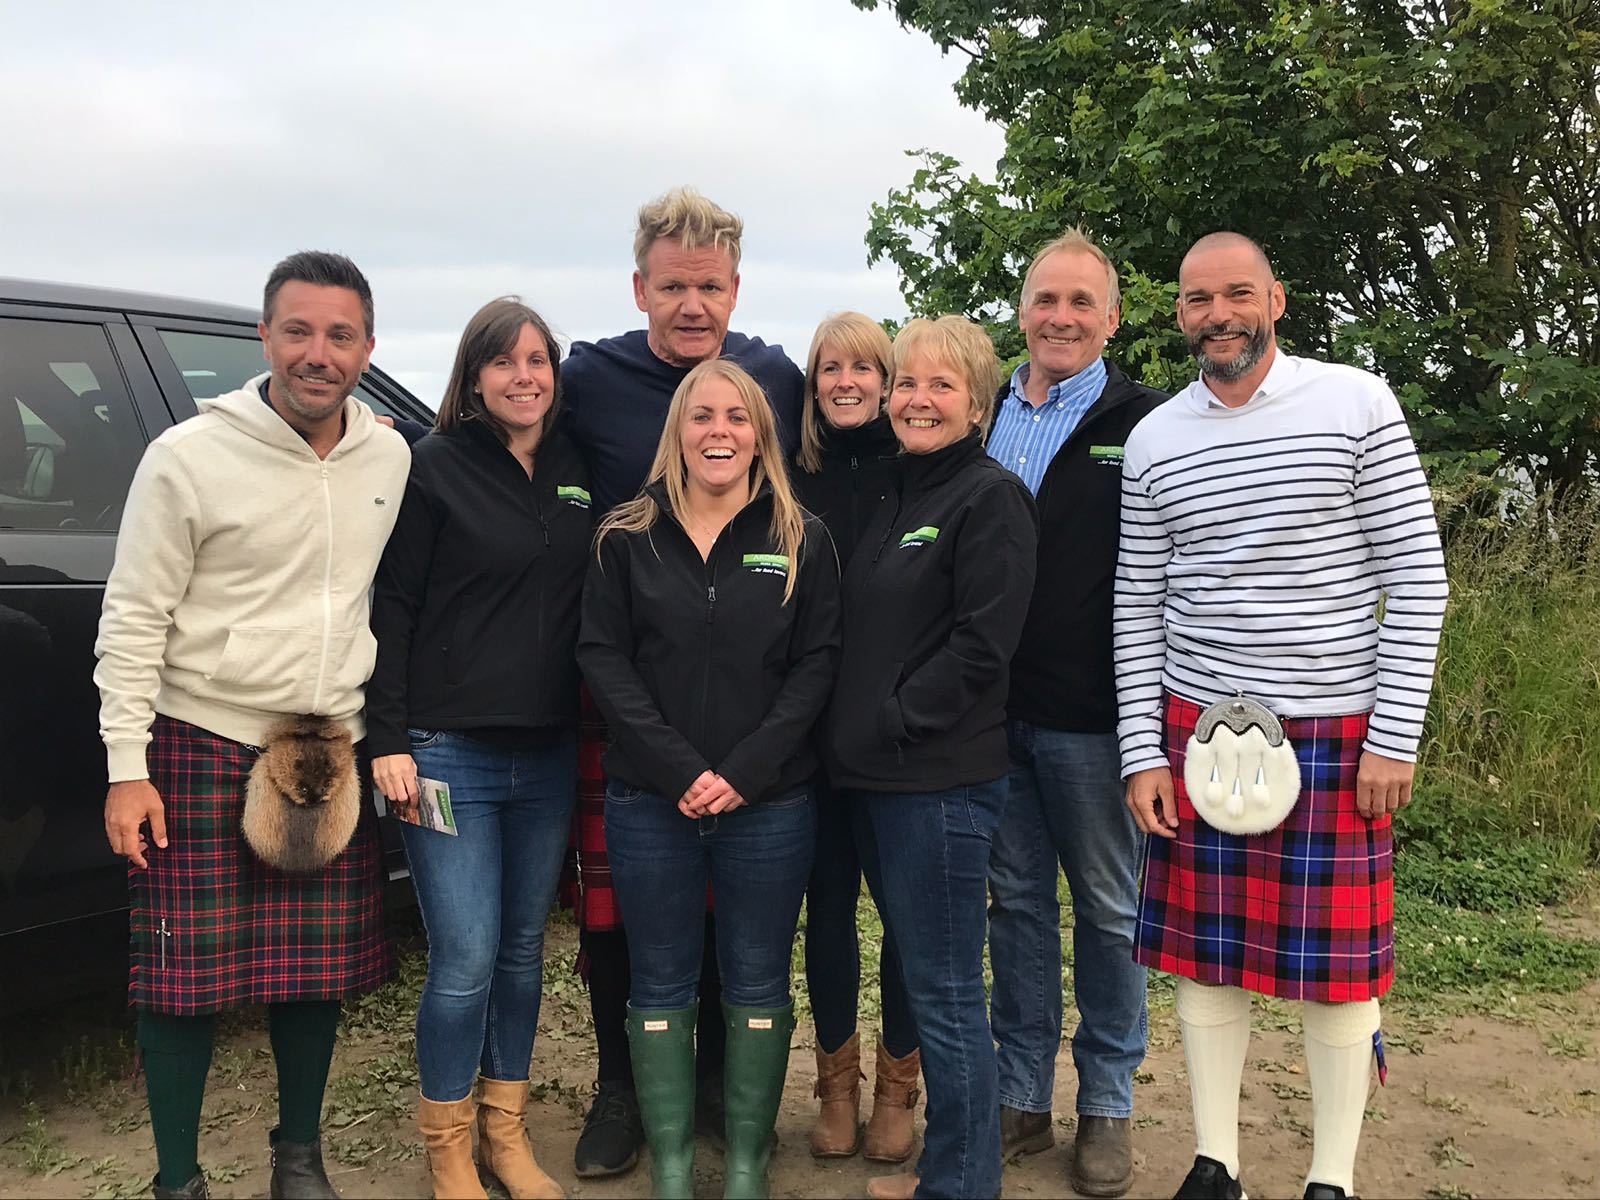 The Ardross Farm Shop team with Gino, Gordon and Fred on their famous televised road trip around Scotland